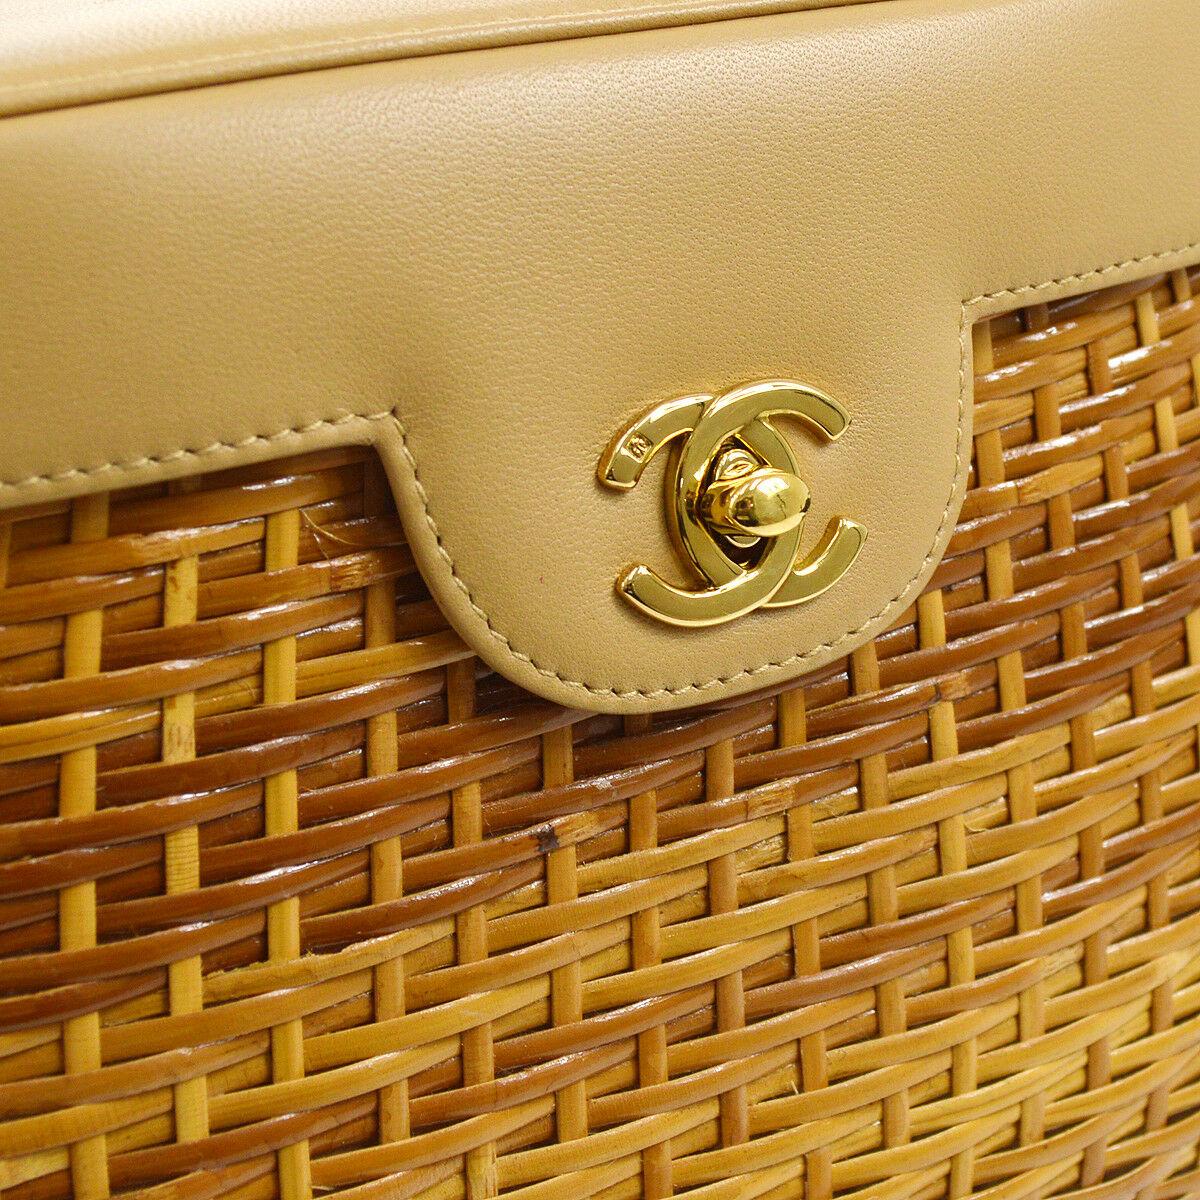 Chanel Vintage Nude Tan Wicker Gold Picnic Lunch Bucket Shoulder Flap Small Bag

Wicker
Leather
Gold tone hardware
Leather lining
Date code present
Made in Italy
Shoulder strap drop 19.5